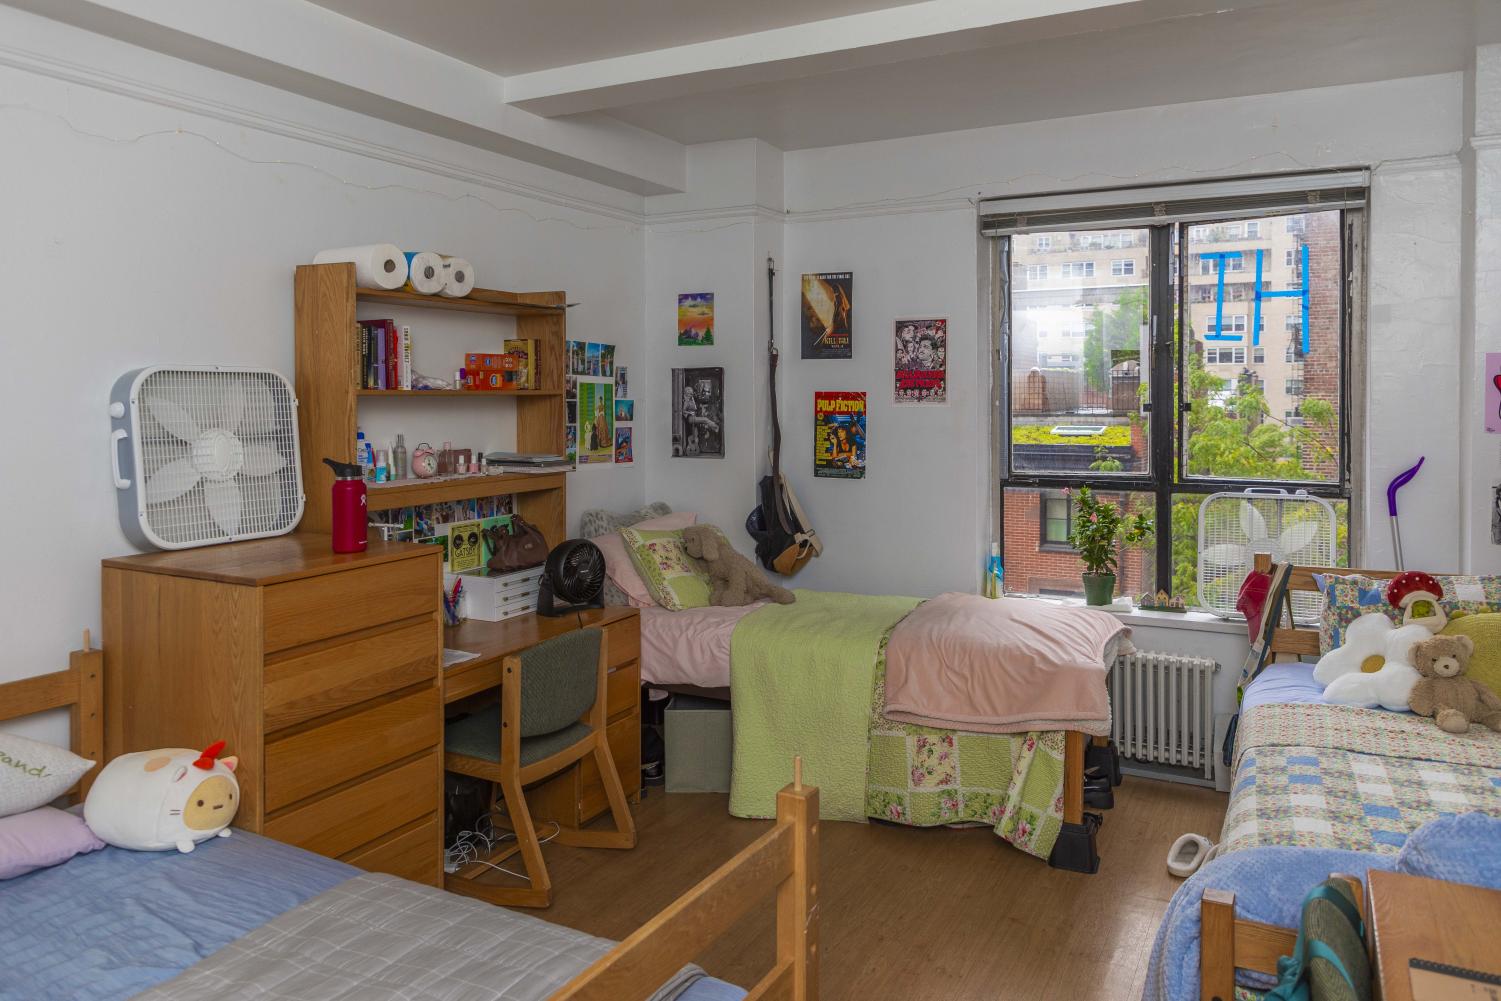 Catherine Desciak, Daisy Brookman and Sophia Wang’s dorm room has three twin beds with accompanying dressers and desks. The room is well decorated with various posters on the walls and small decor items throughout.